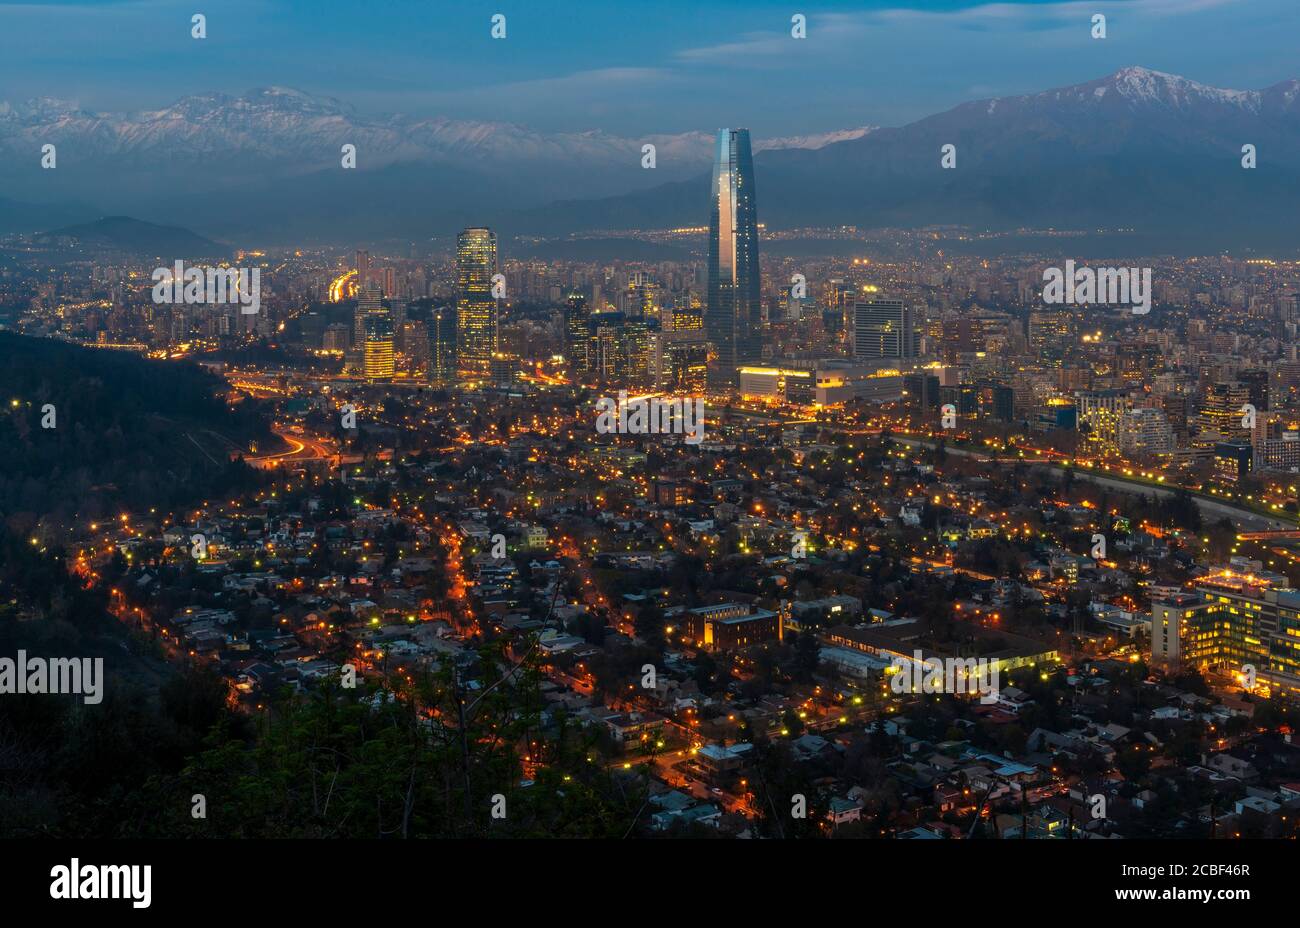 Night cityscape of Santiago de Chile with the Andes mountains in the background, Chile. Stock Photo